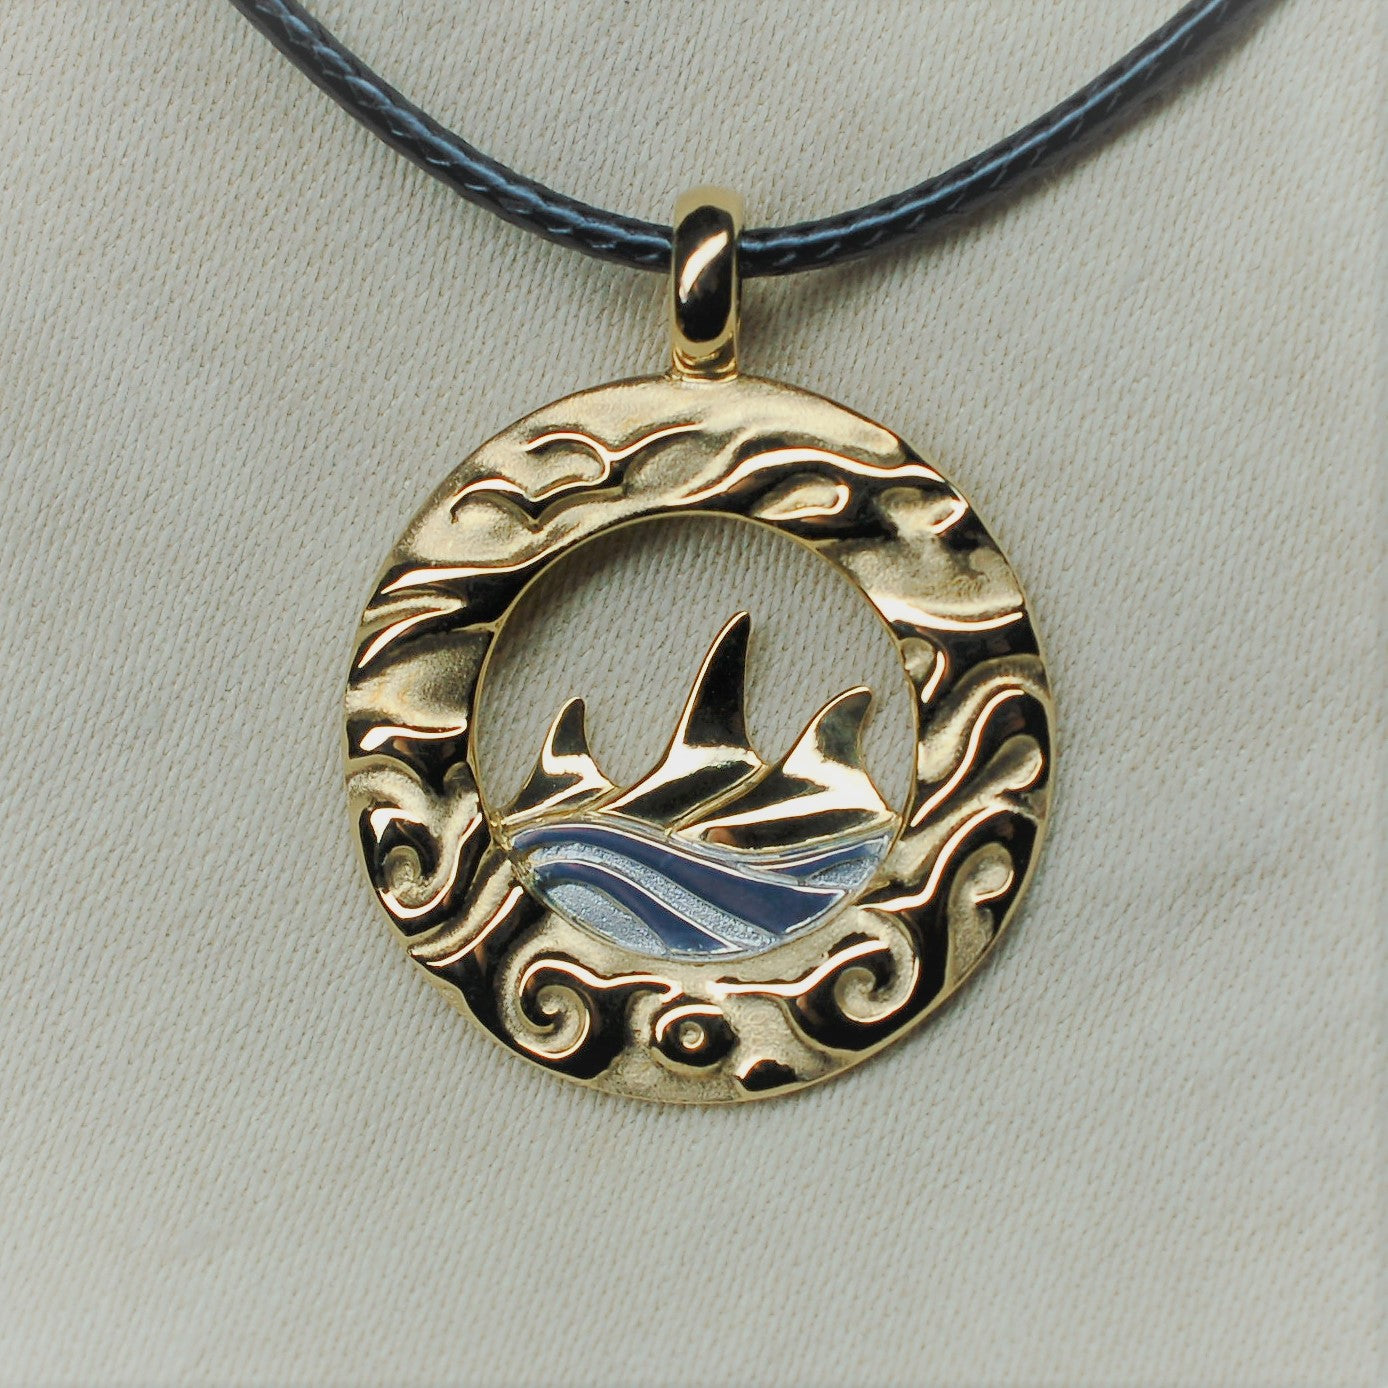 Orca pod necklace, solid gold, killer whale family portrait pendant. Hand made to order © Adrian Ashley